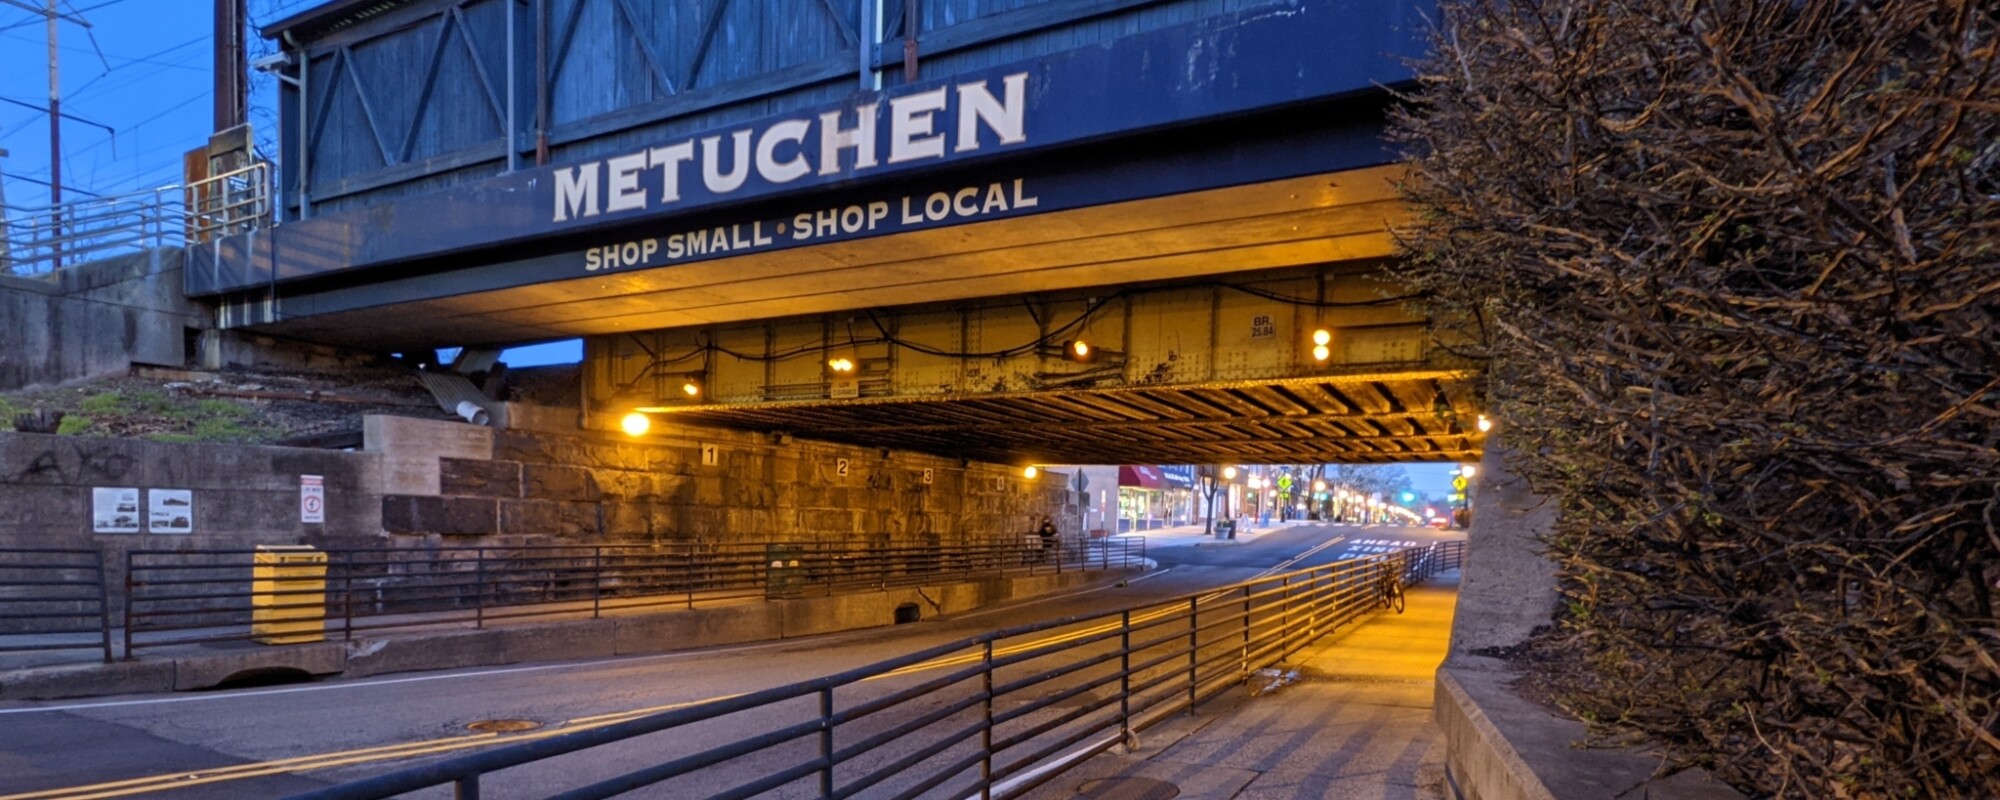 A covered, elevated railroad line crosses a roadway and pedestrian walkway. The words "Metuchen Shop Small, Shop Local" are painted in large white letters.